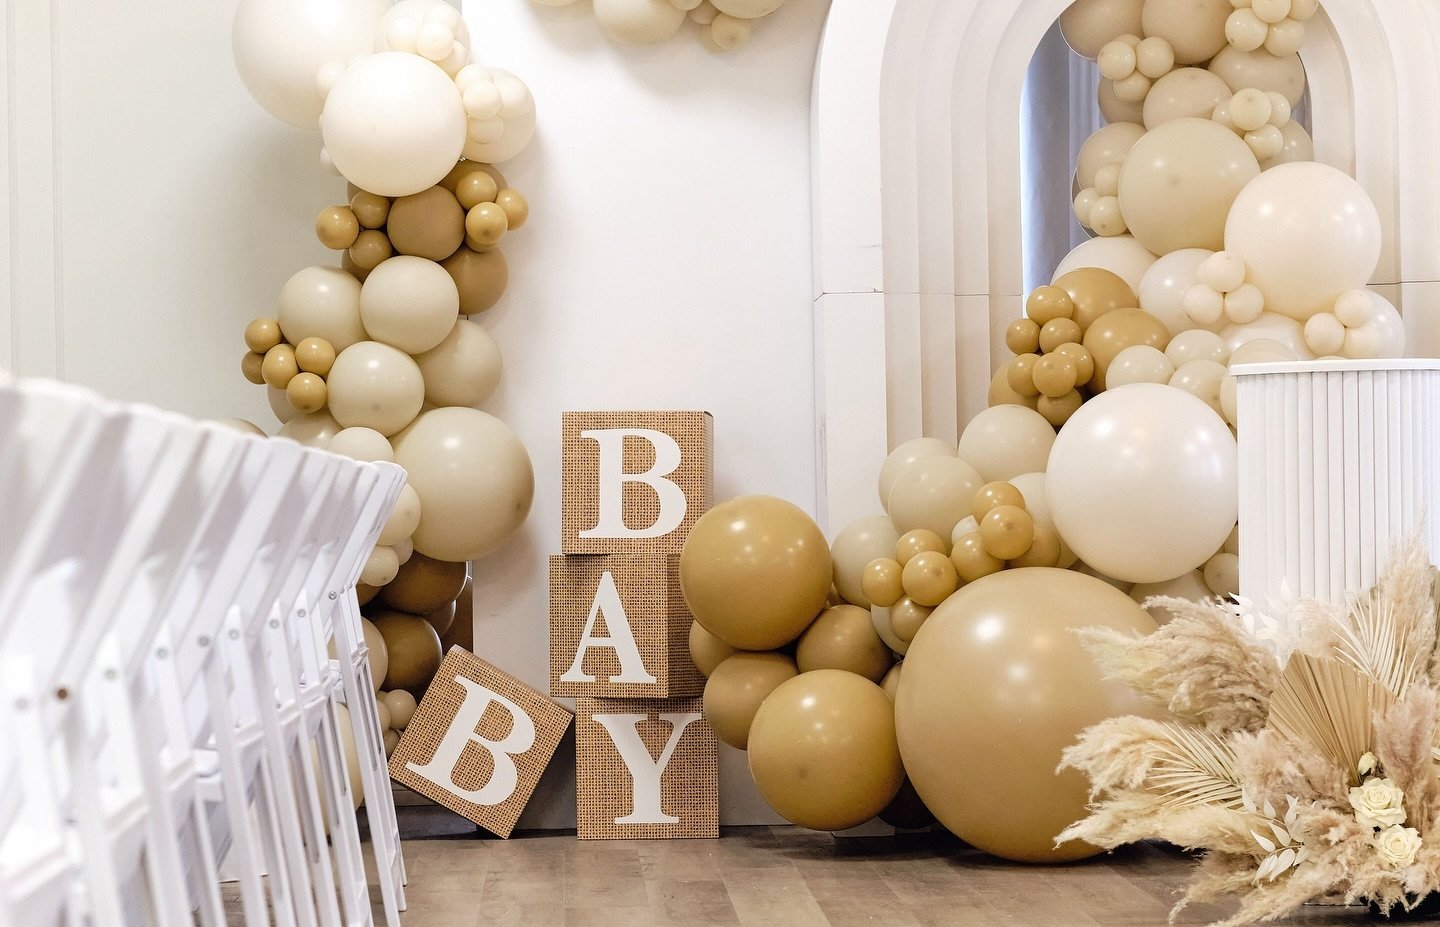 🧸 OH BABY: Welcome to Hodo&rsquo;s Baby Shower!
___

Table Setting &amp; Backdrop Decor: @decorandvibes
Welcome Sign: @signedbytobs 
Venue: @ark_haus 
Photographer: @samuelbass 
___
#decorandvibes #babyshower #ohbaby #ottawaevents #eventdecor #ottaw